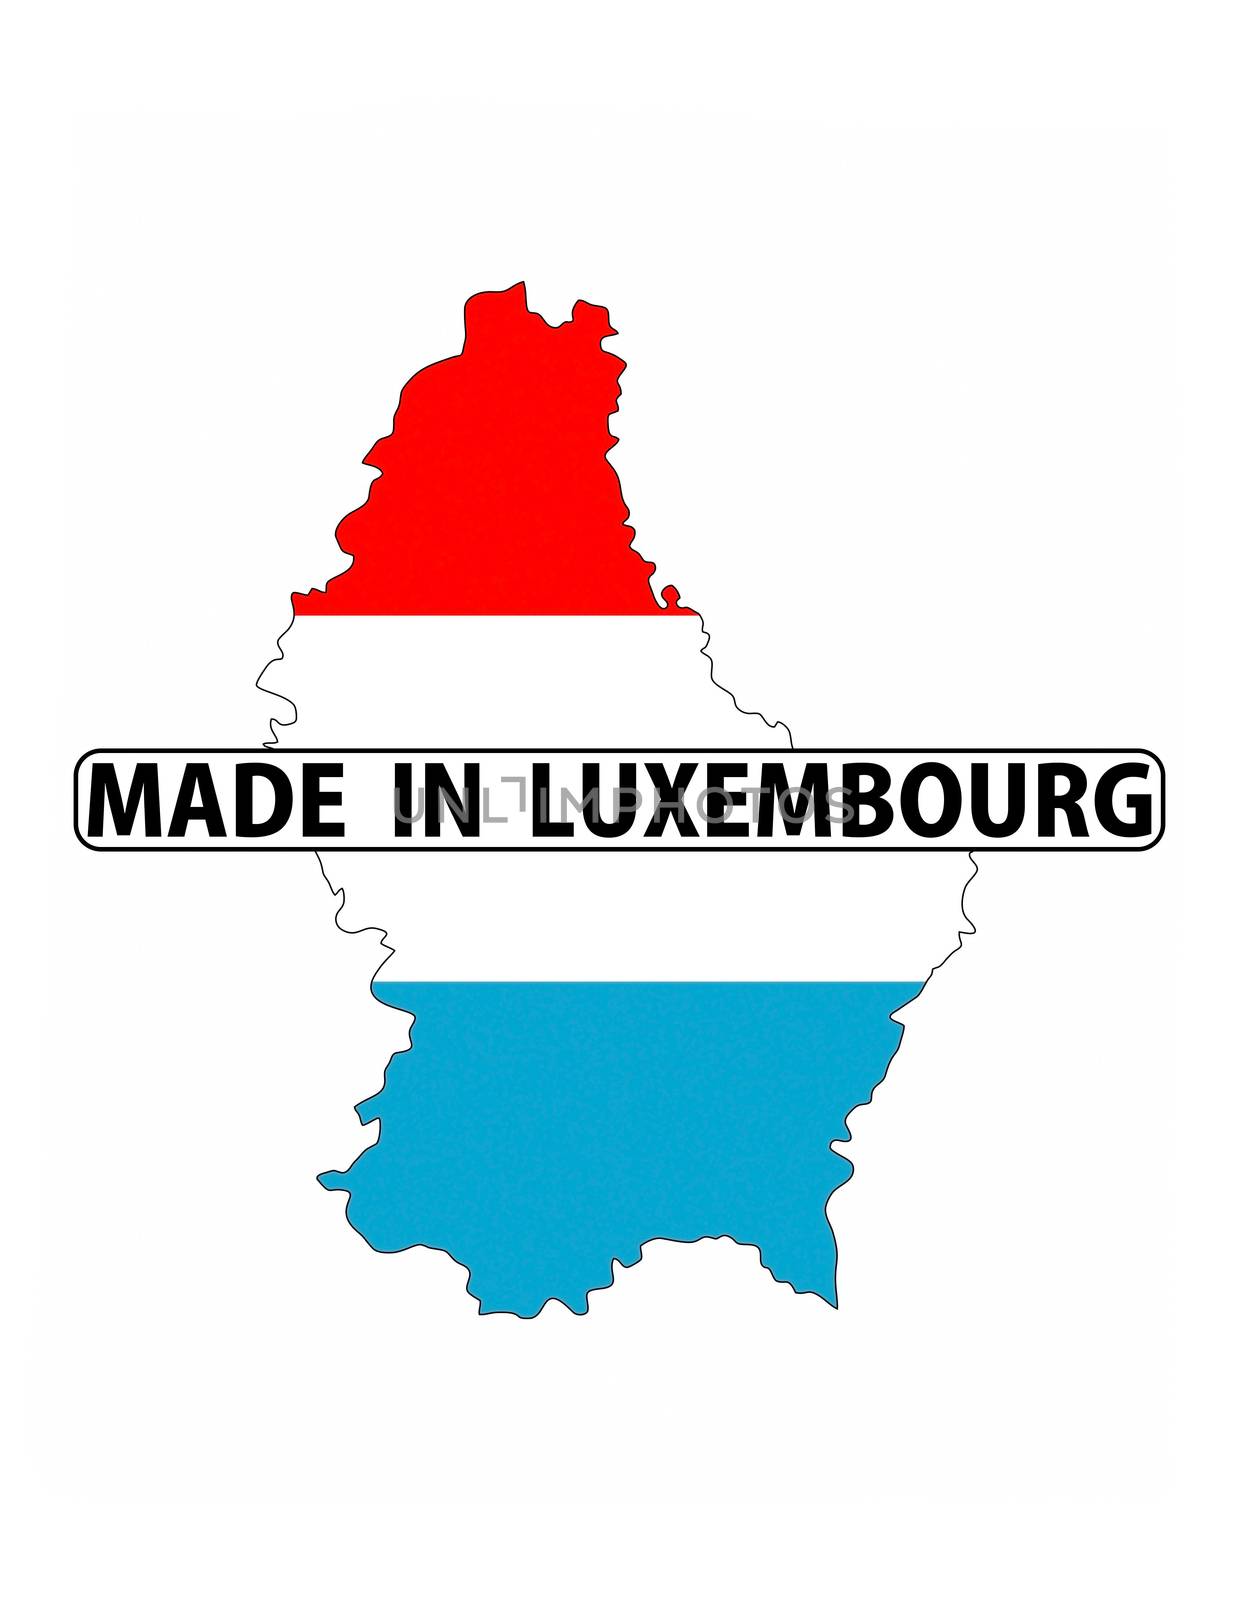 made in luxembourg country national flag map shape with text